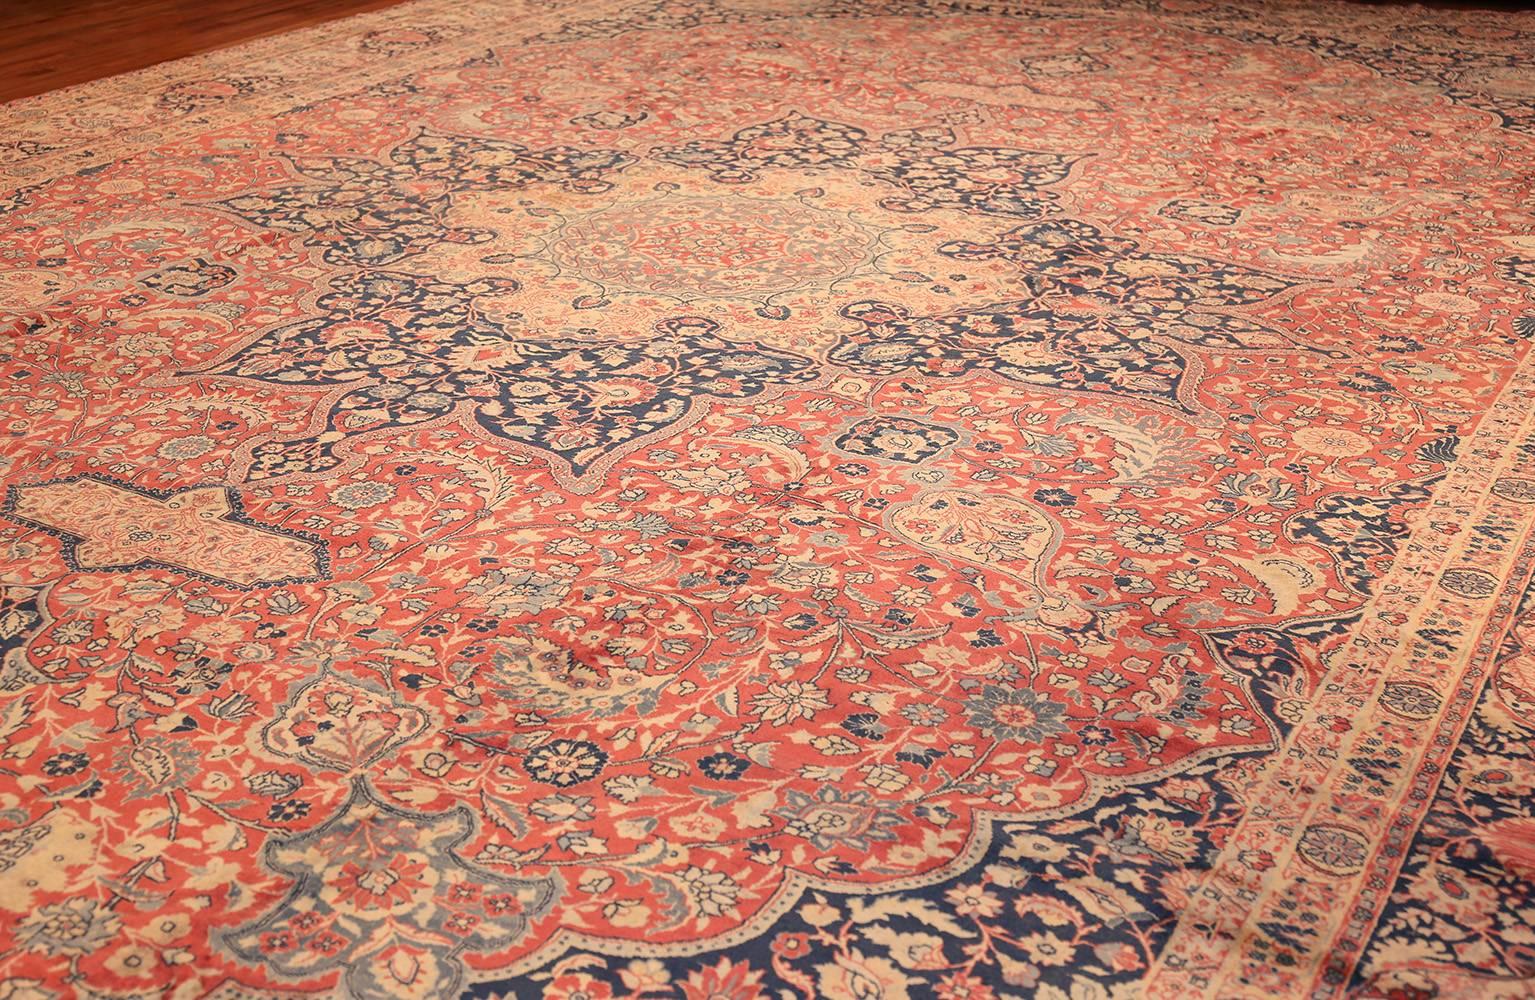 Antique Persian Tabriz Carpet. Size: 14 ft 10 in x 21 ft 5 in (4.52 m x 6.53 m) 3